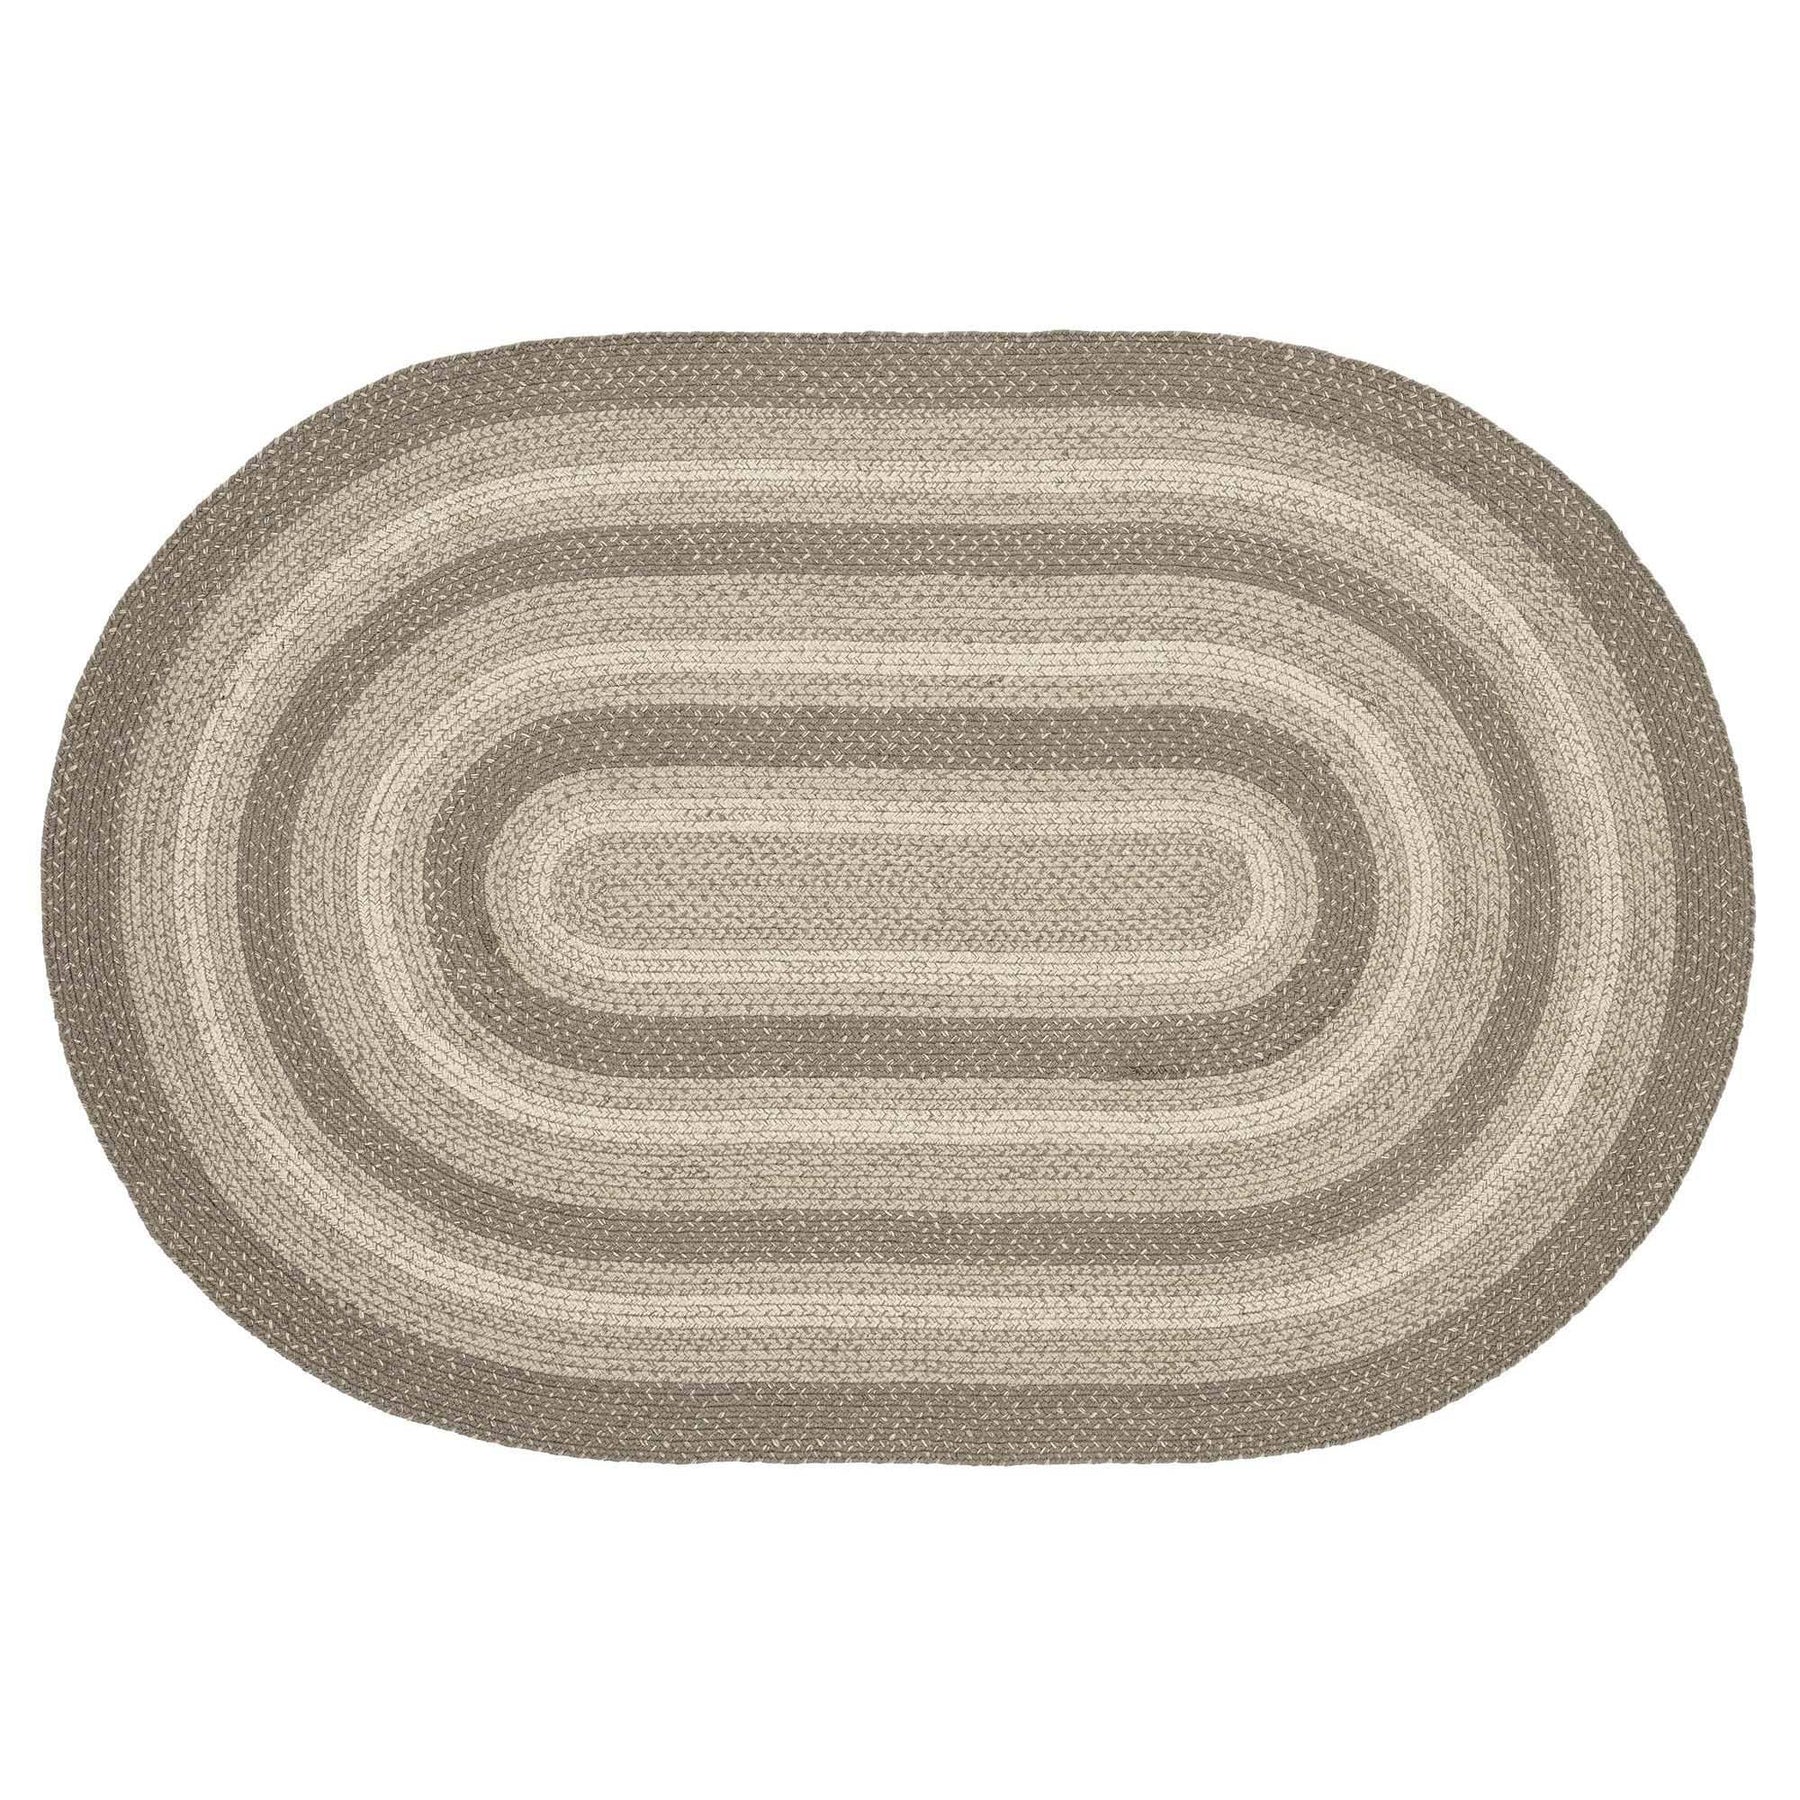 Cobblestone Oval Braided Rug 4x6' - with Pad